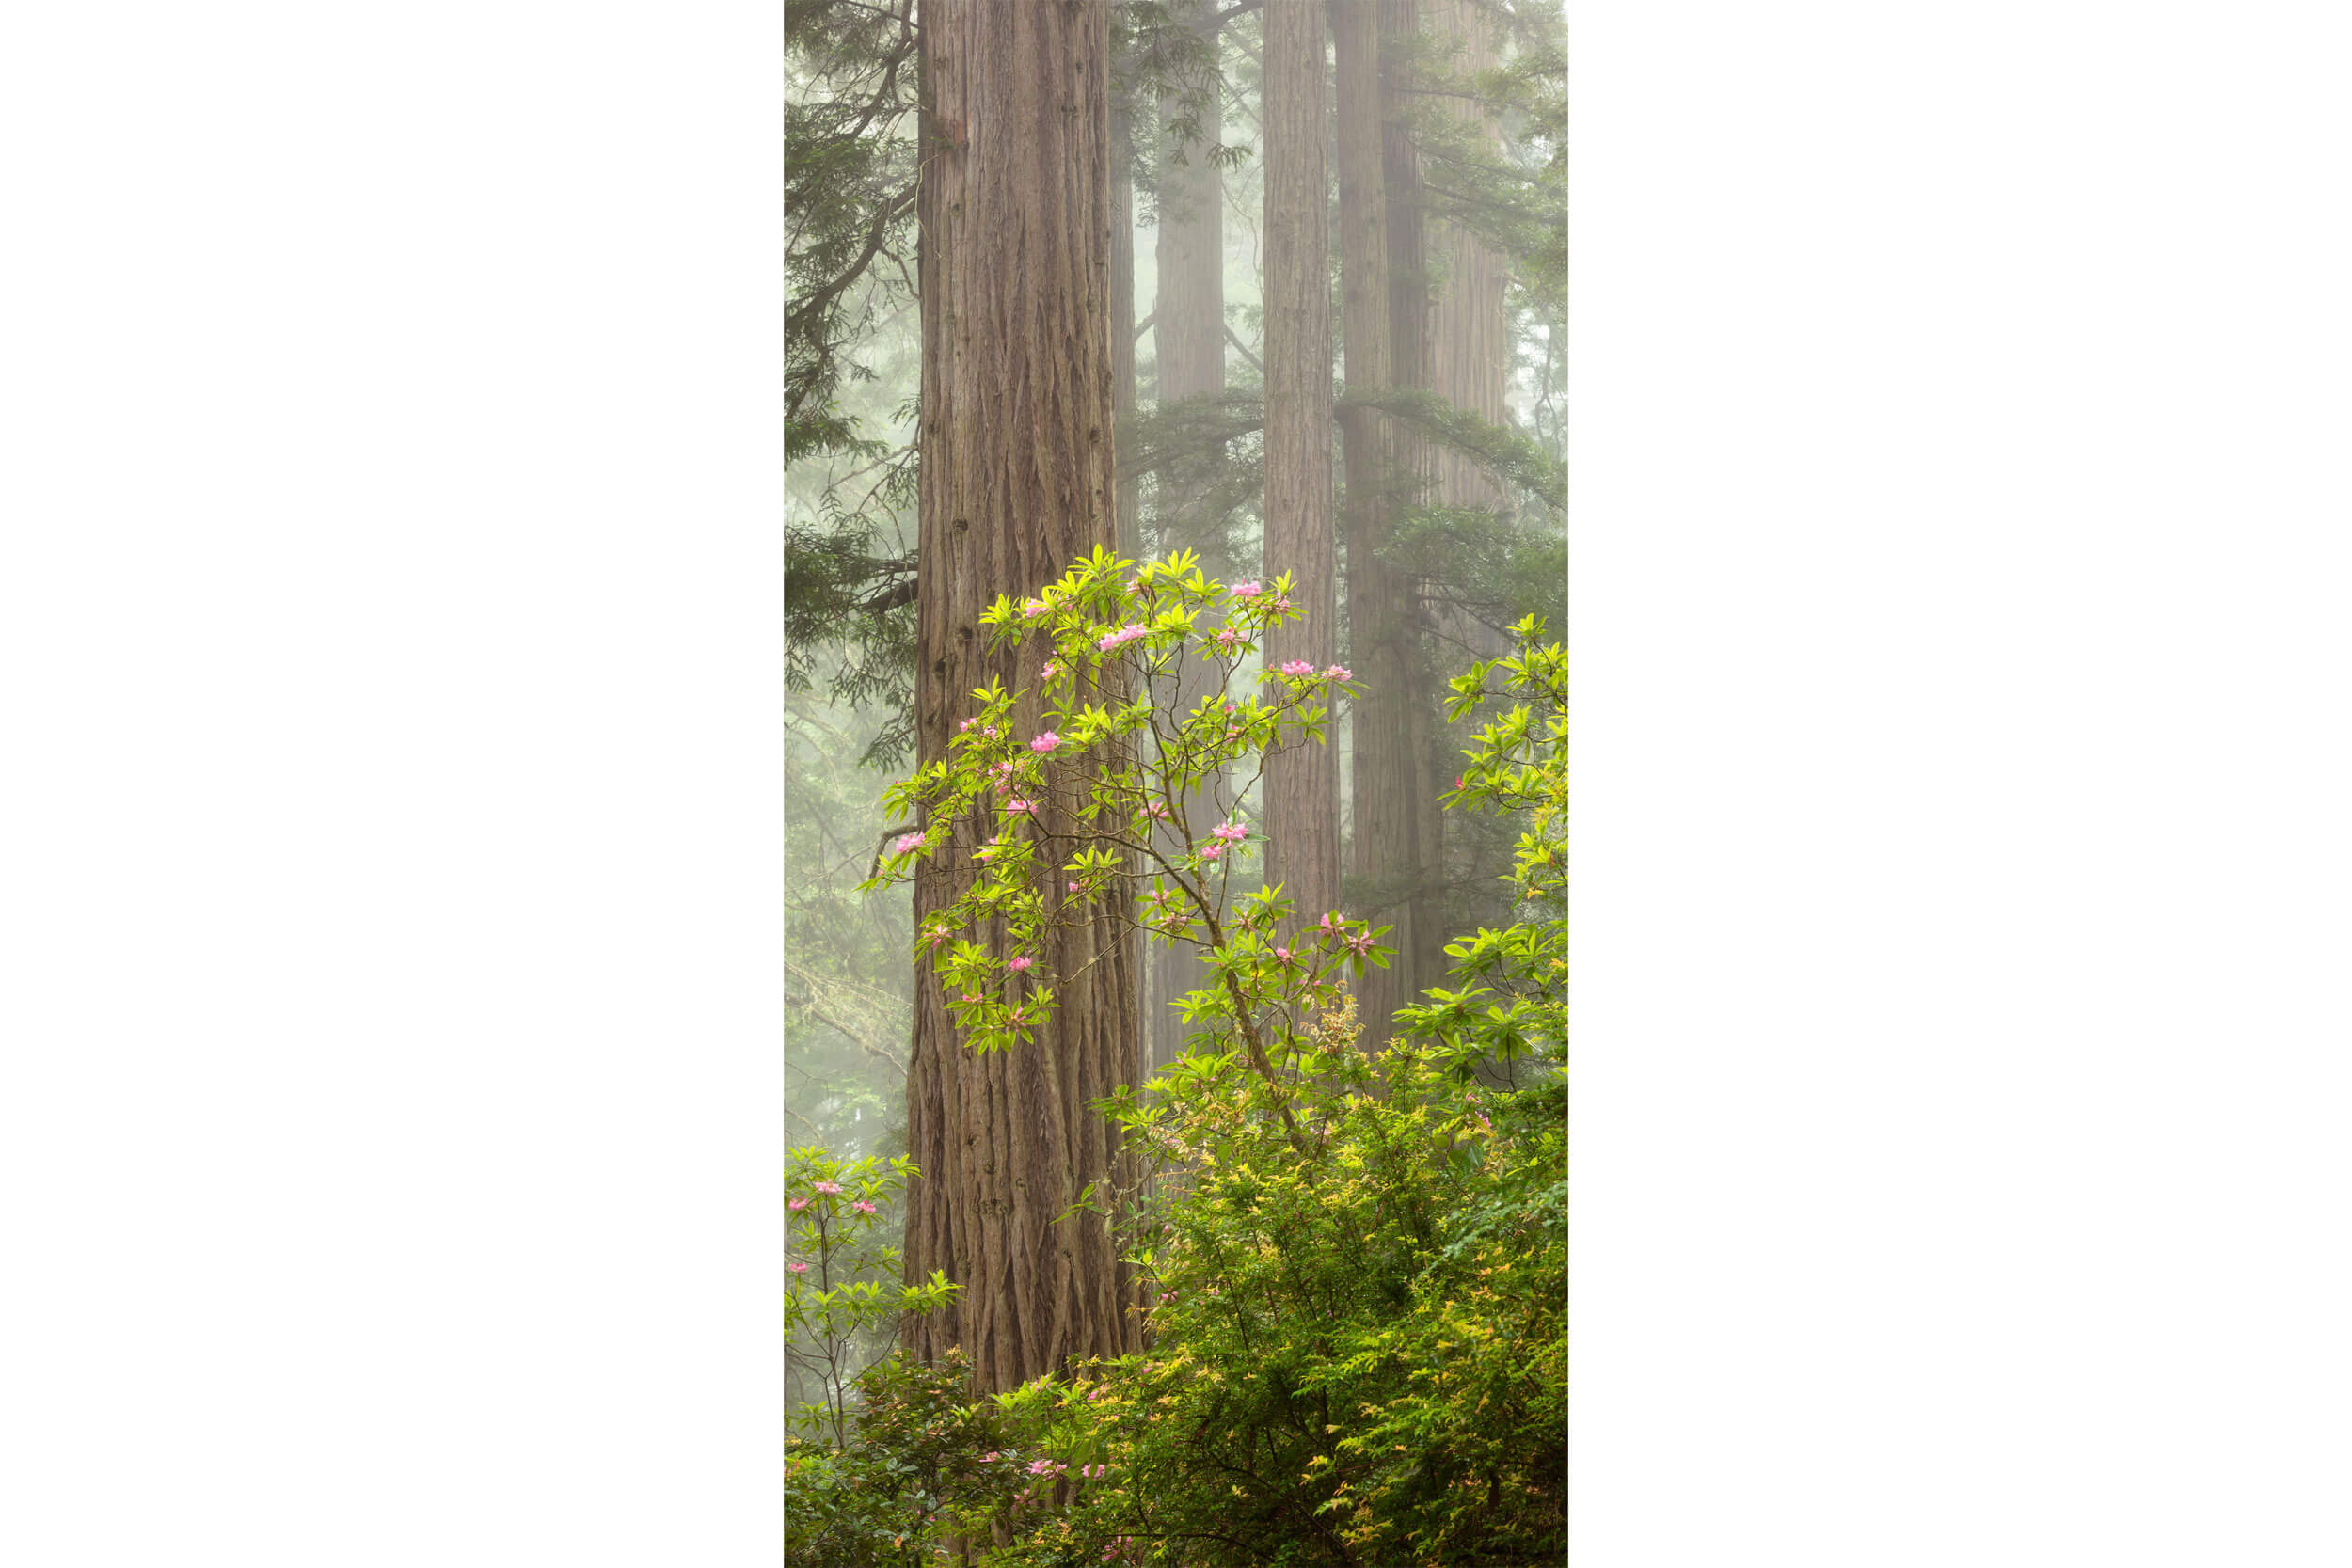 A redwoods picture with a blooming rhododendron from Del Norte Redwoods State Park in California.